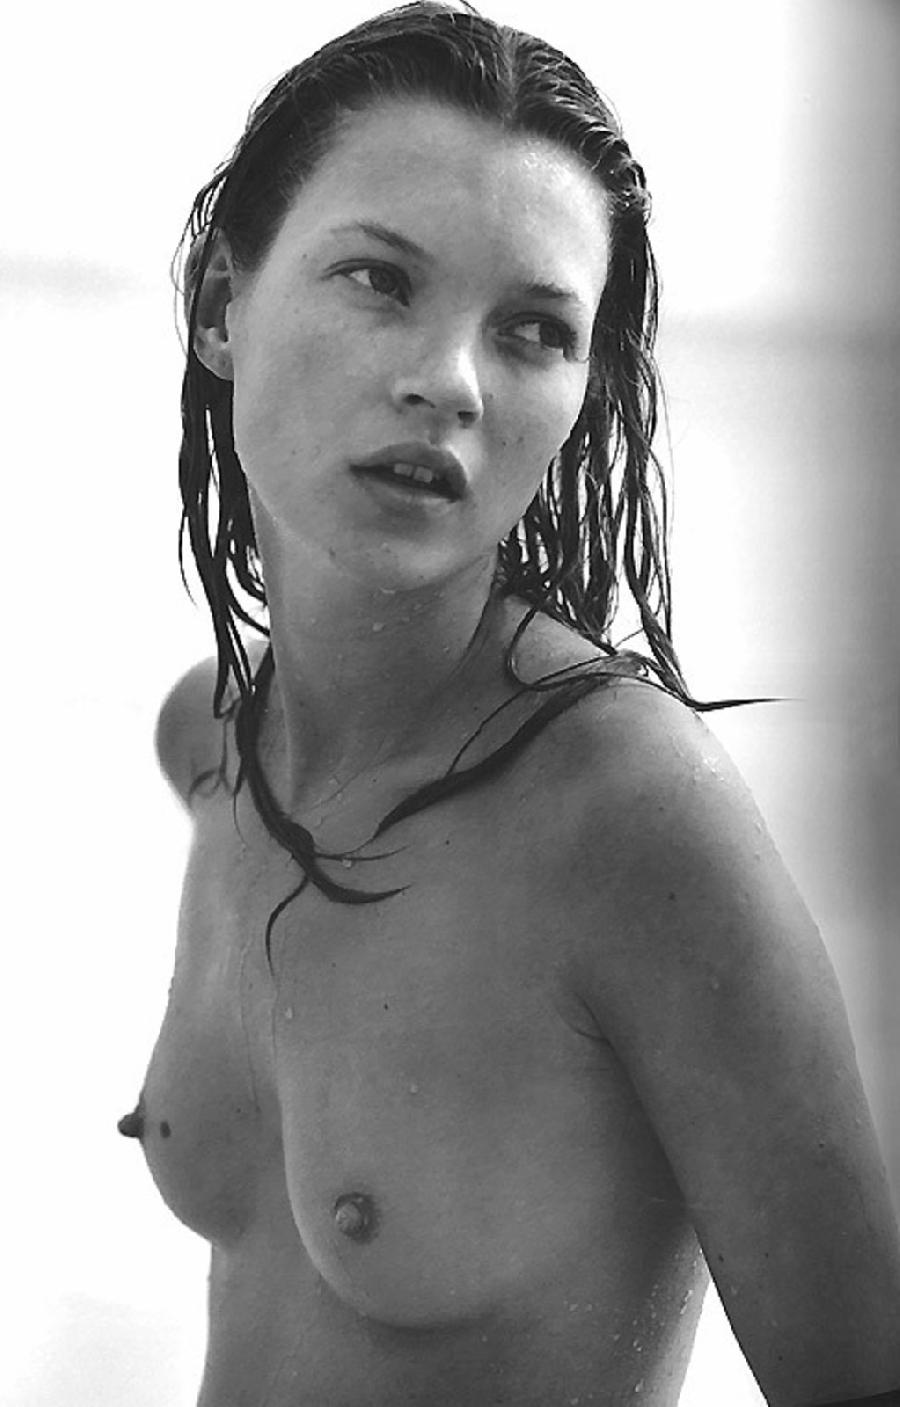 British model in black and white pics - Kate Moss - 24